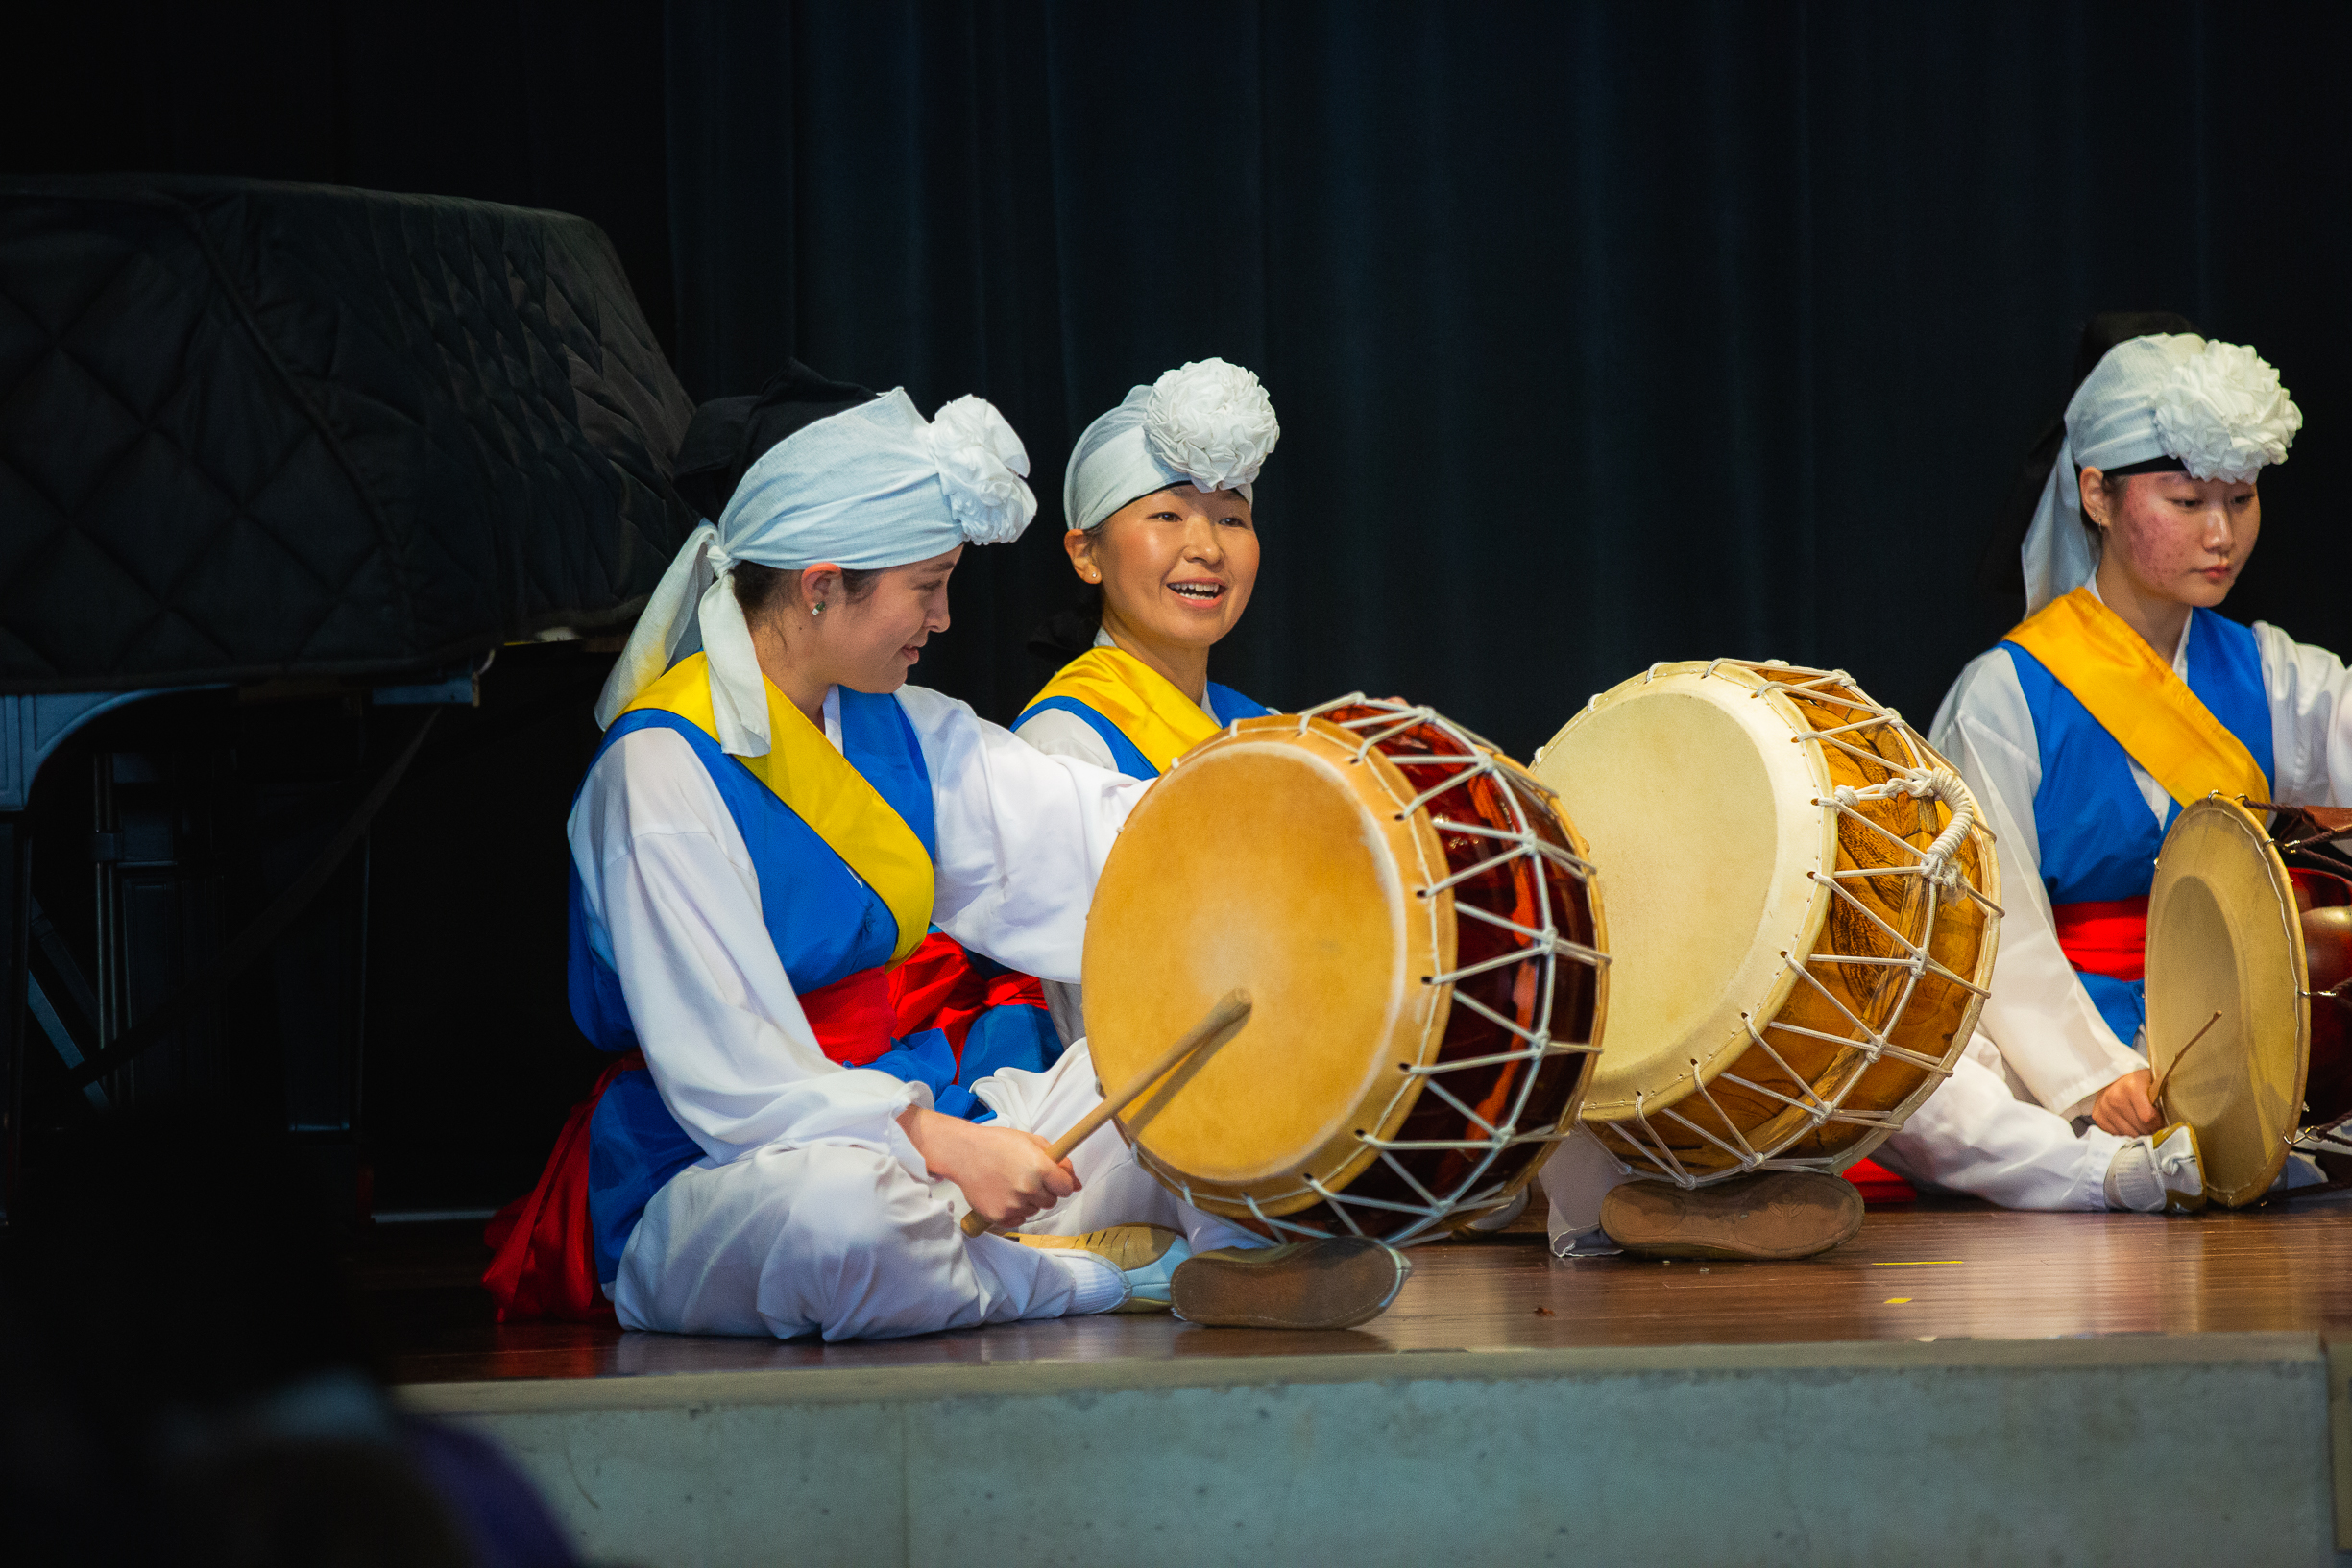 San Diego Pungmul Institute drummers on stage performing